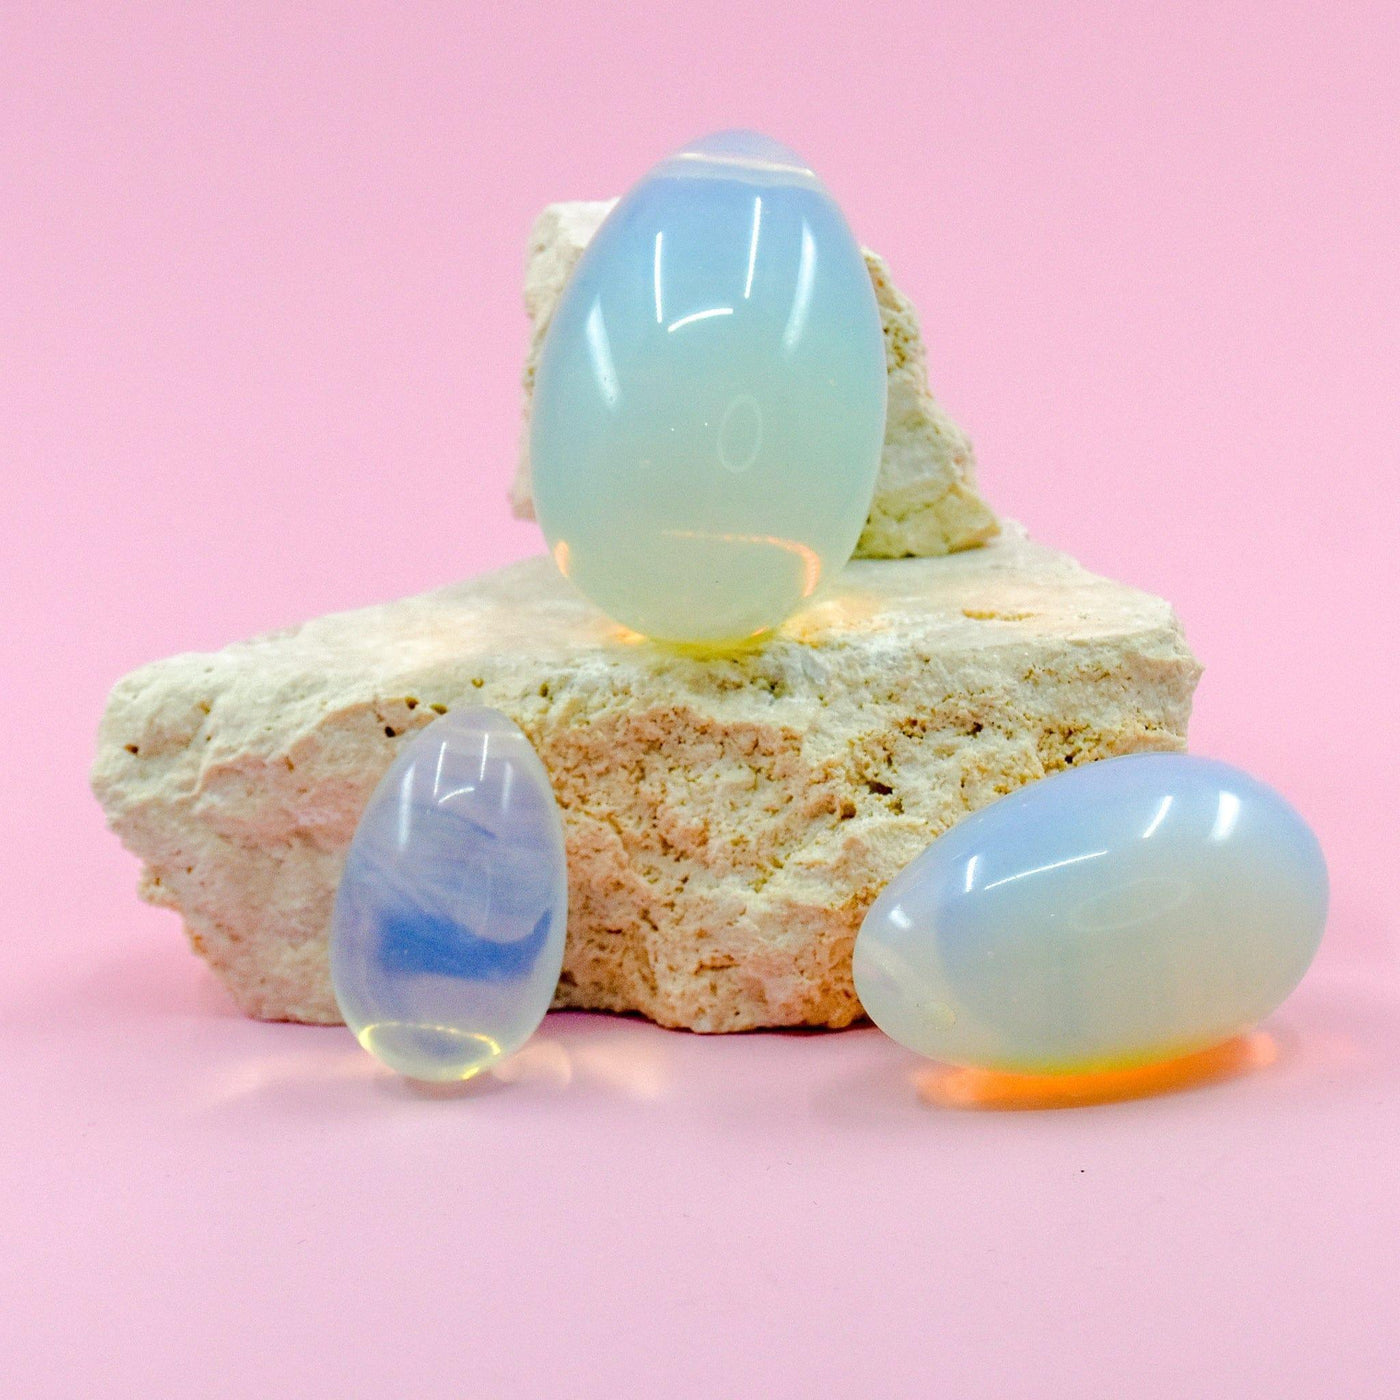 Opal Yoni Eggs - Wands of Lust Co